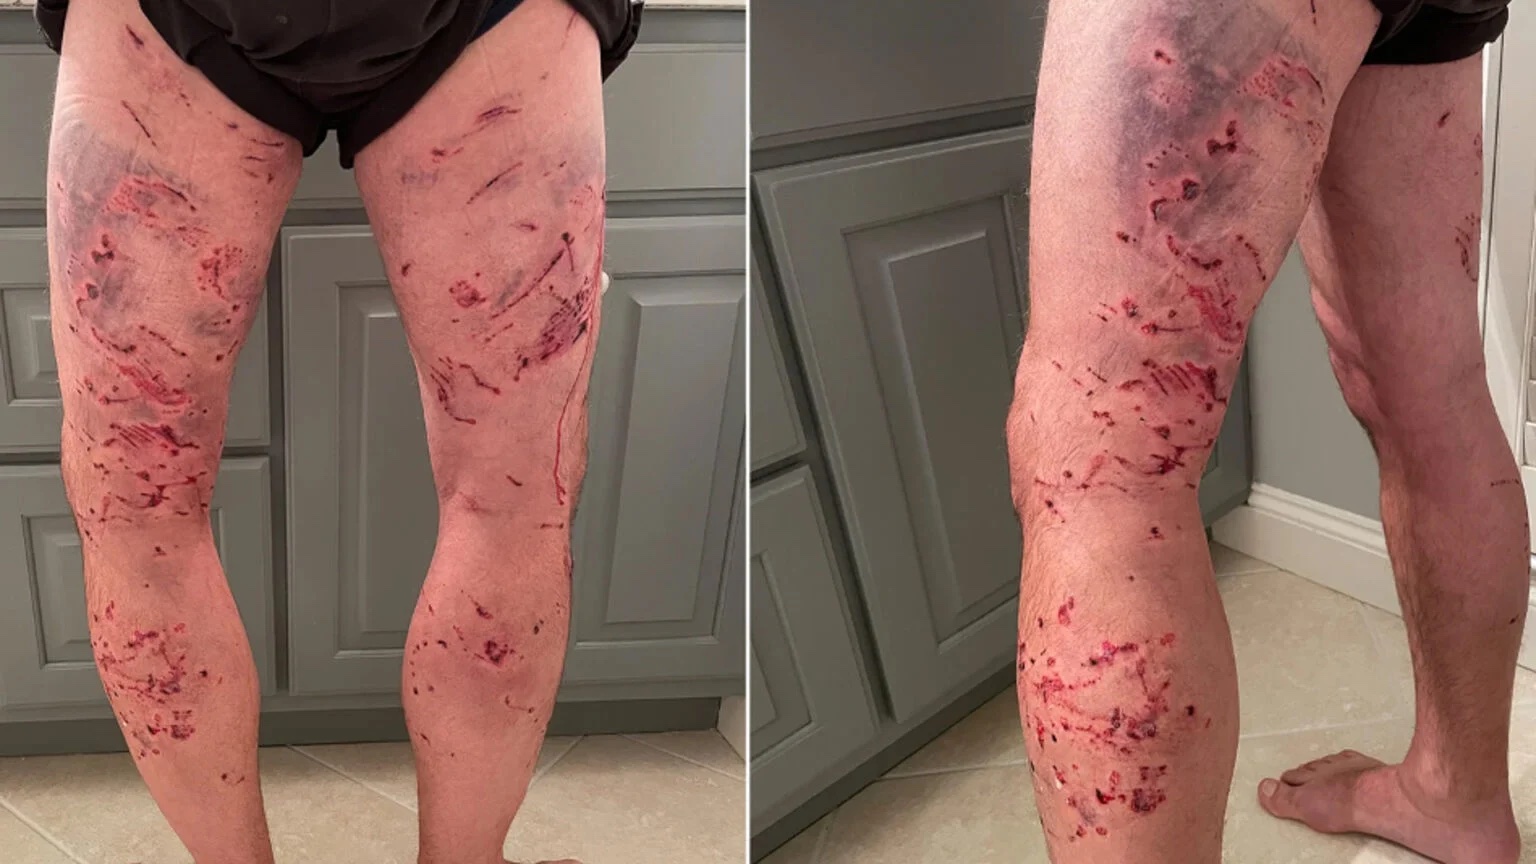 Georgia hunter attacked by dogs